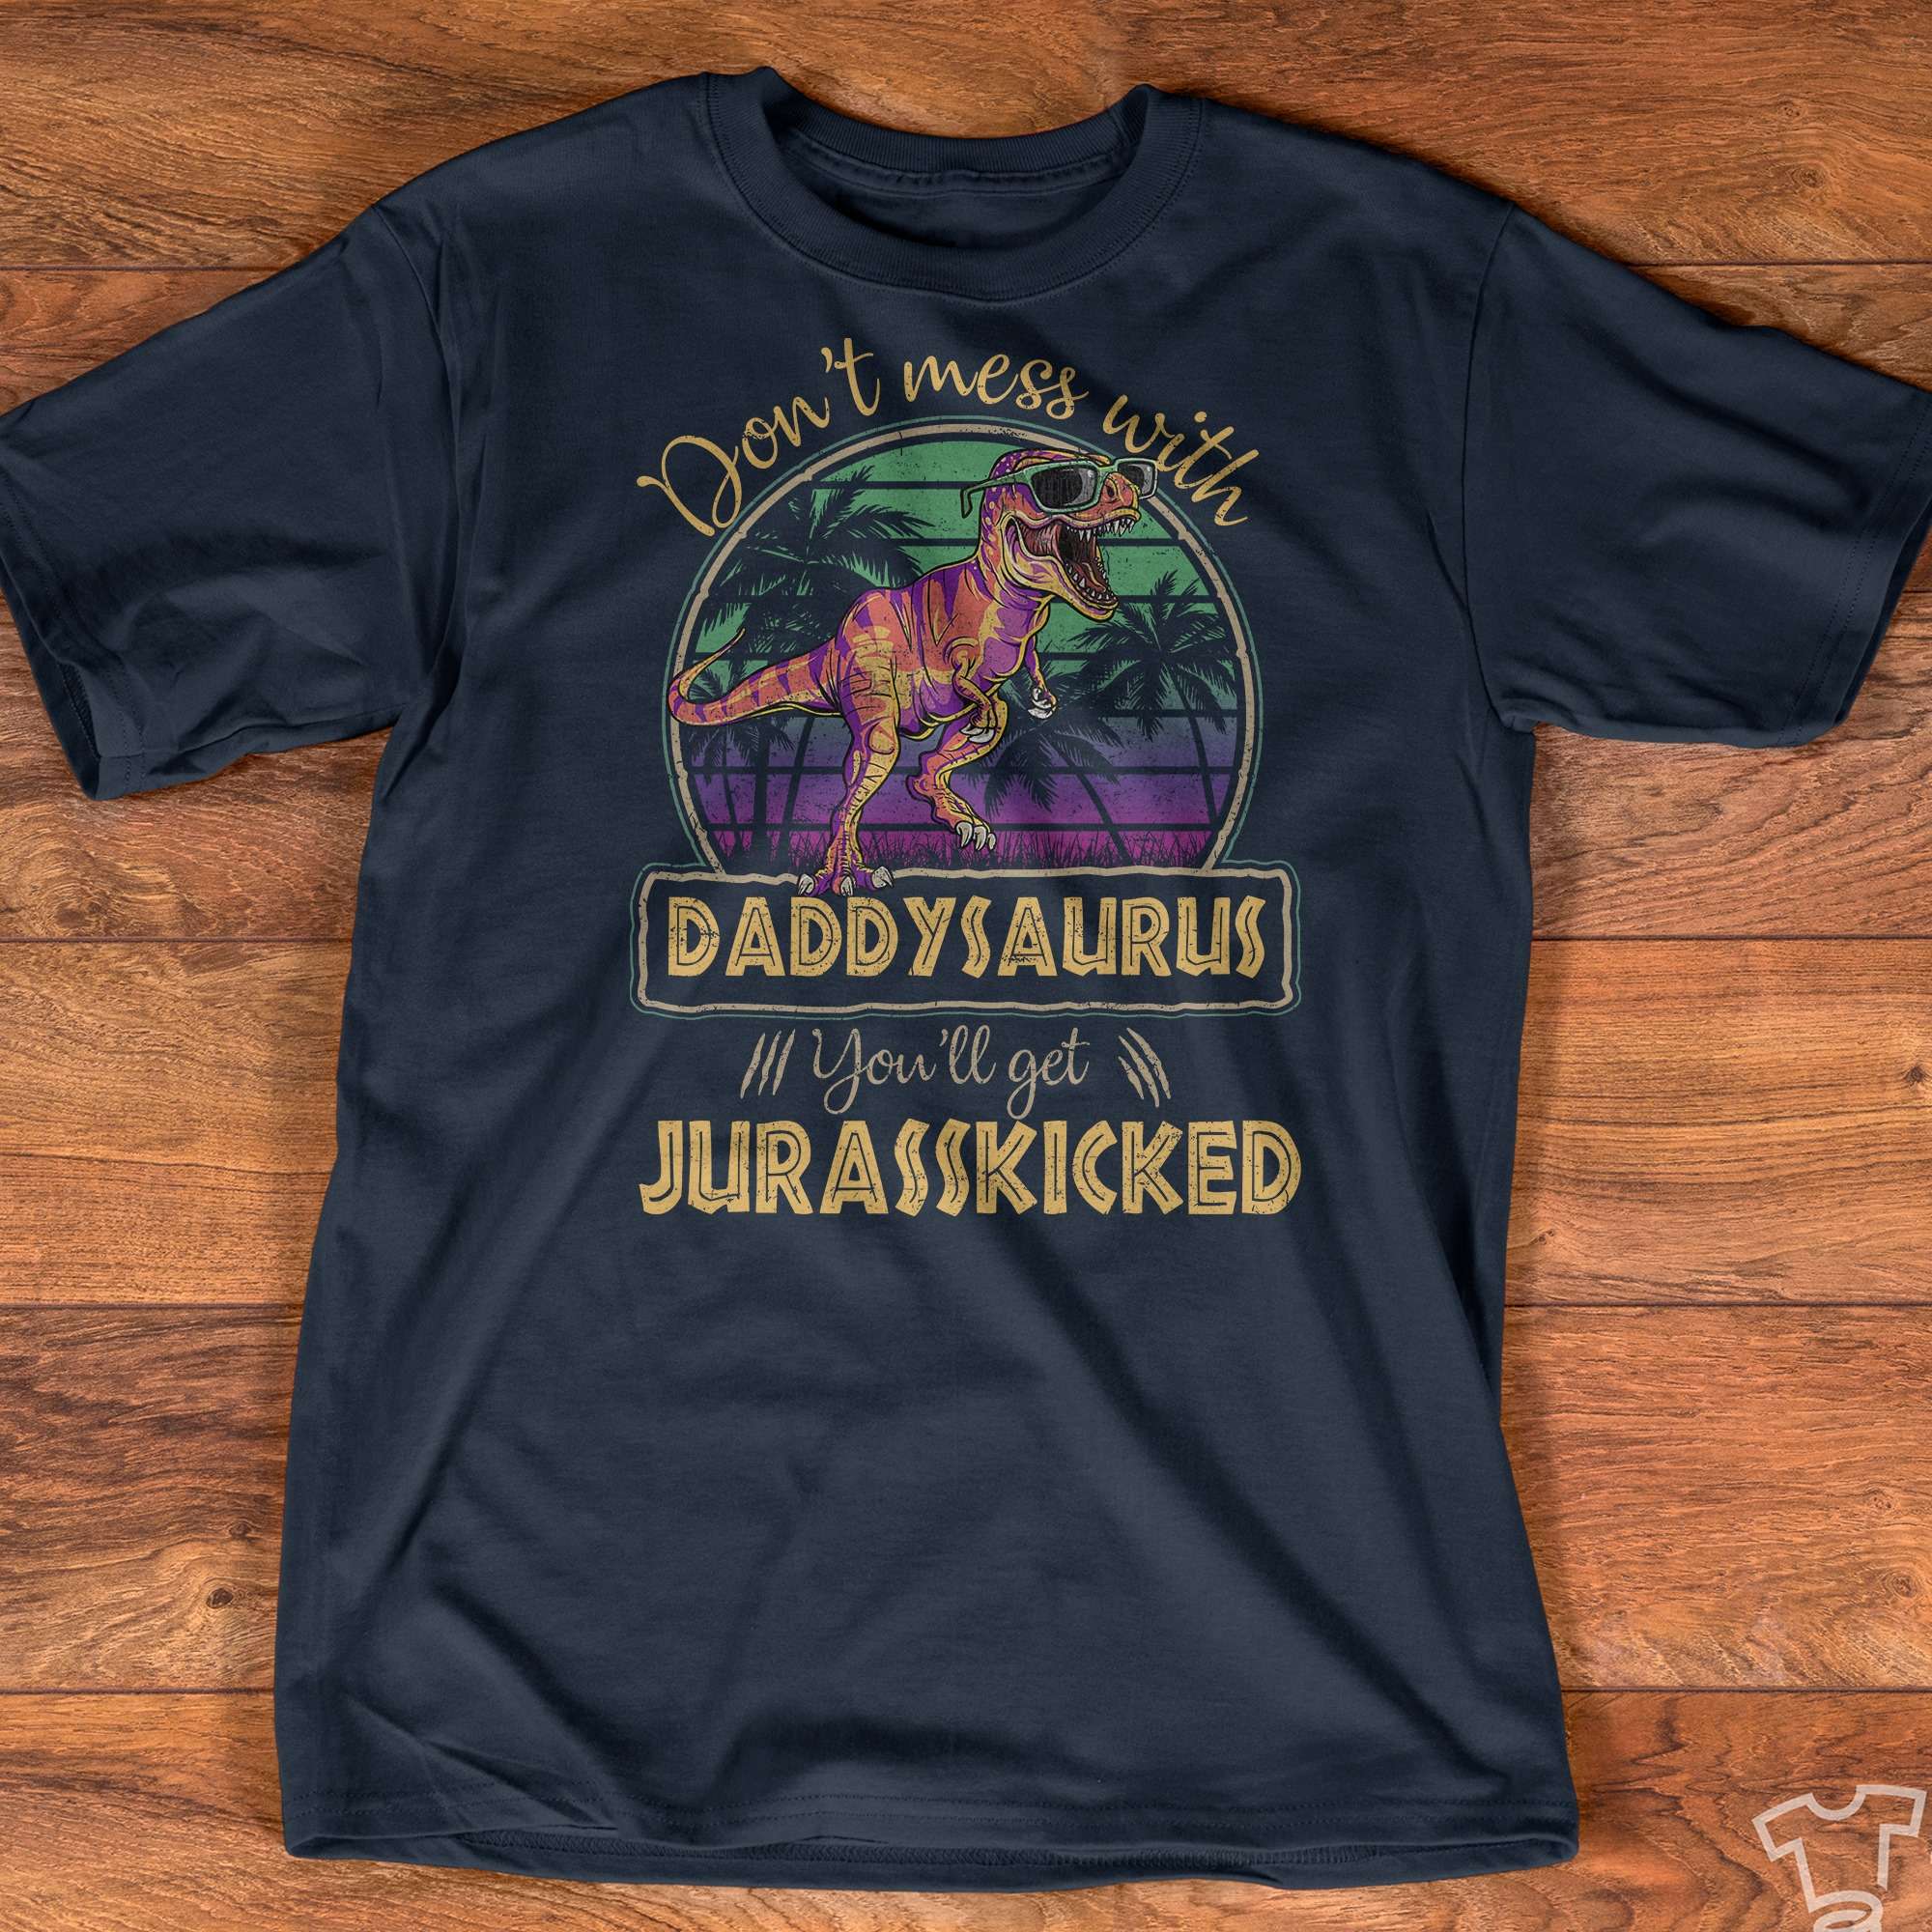 Dinosaur Daddy - Don't mess with daddysaurus you'll get jurasskicked